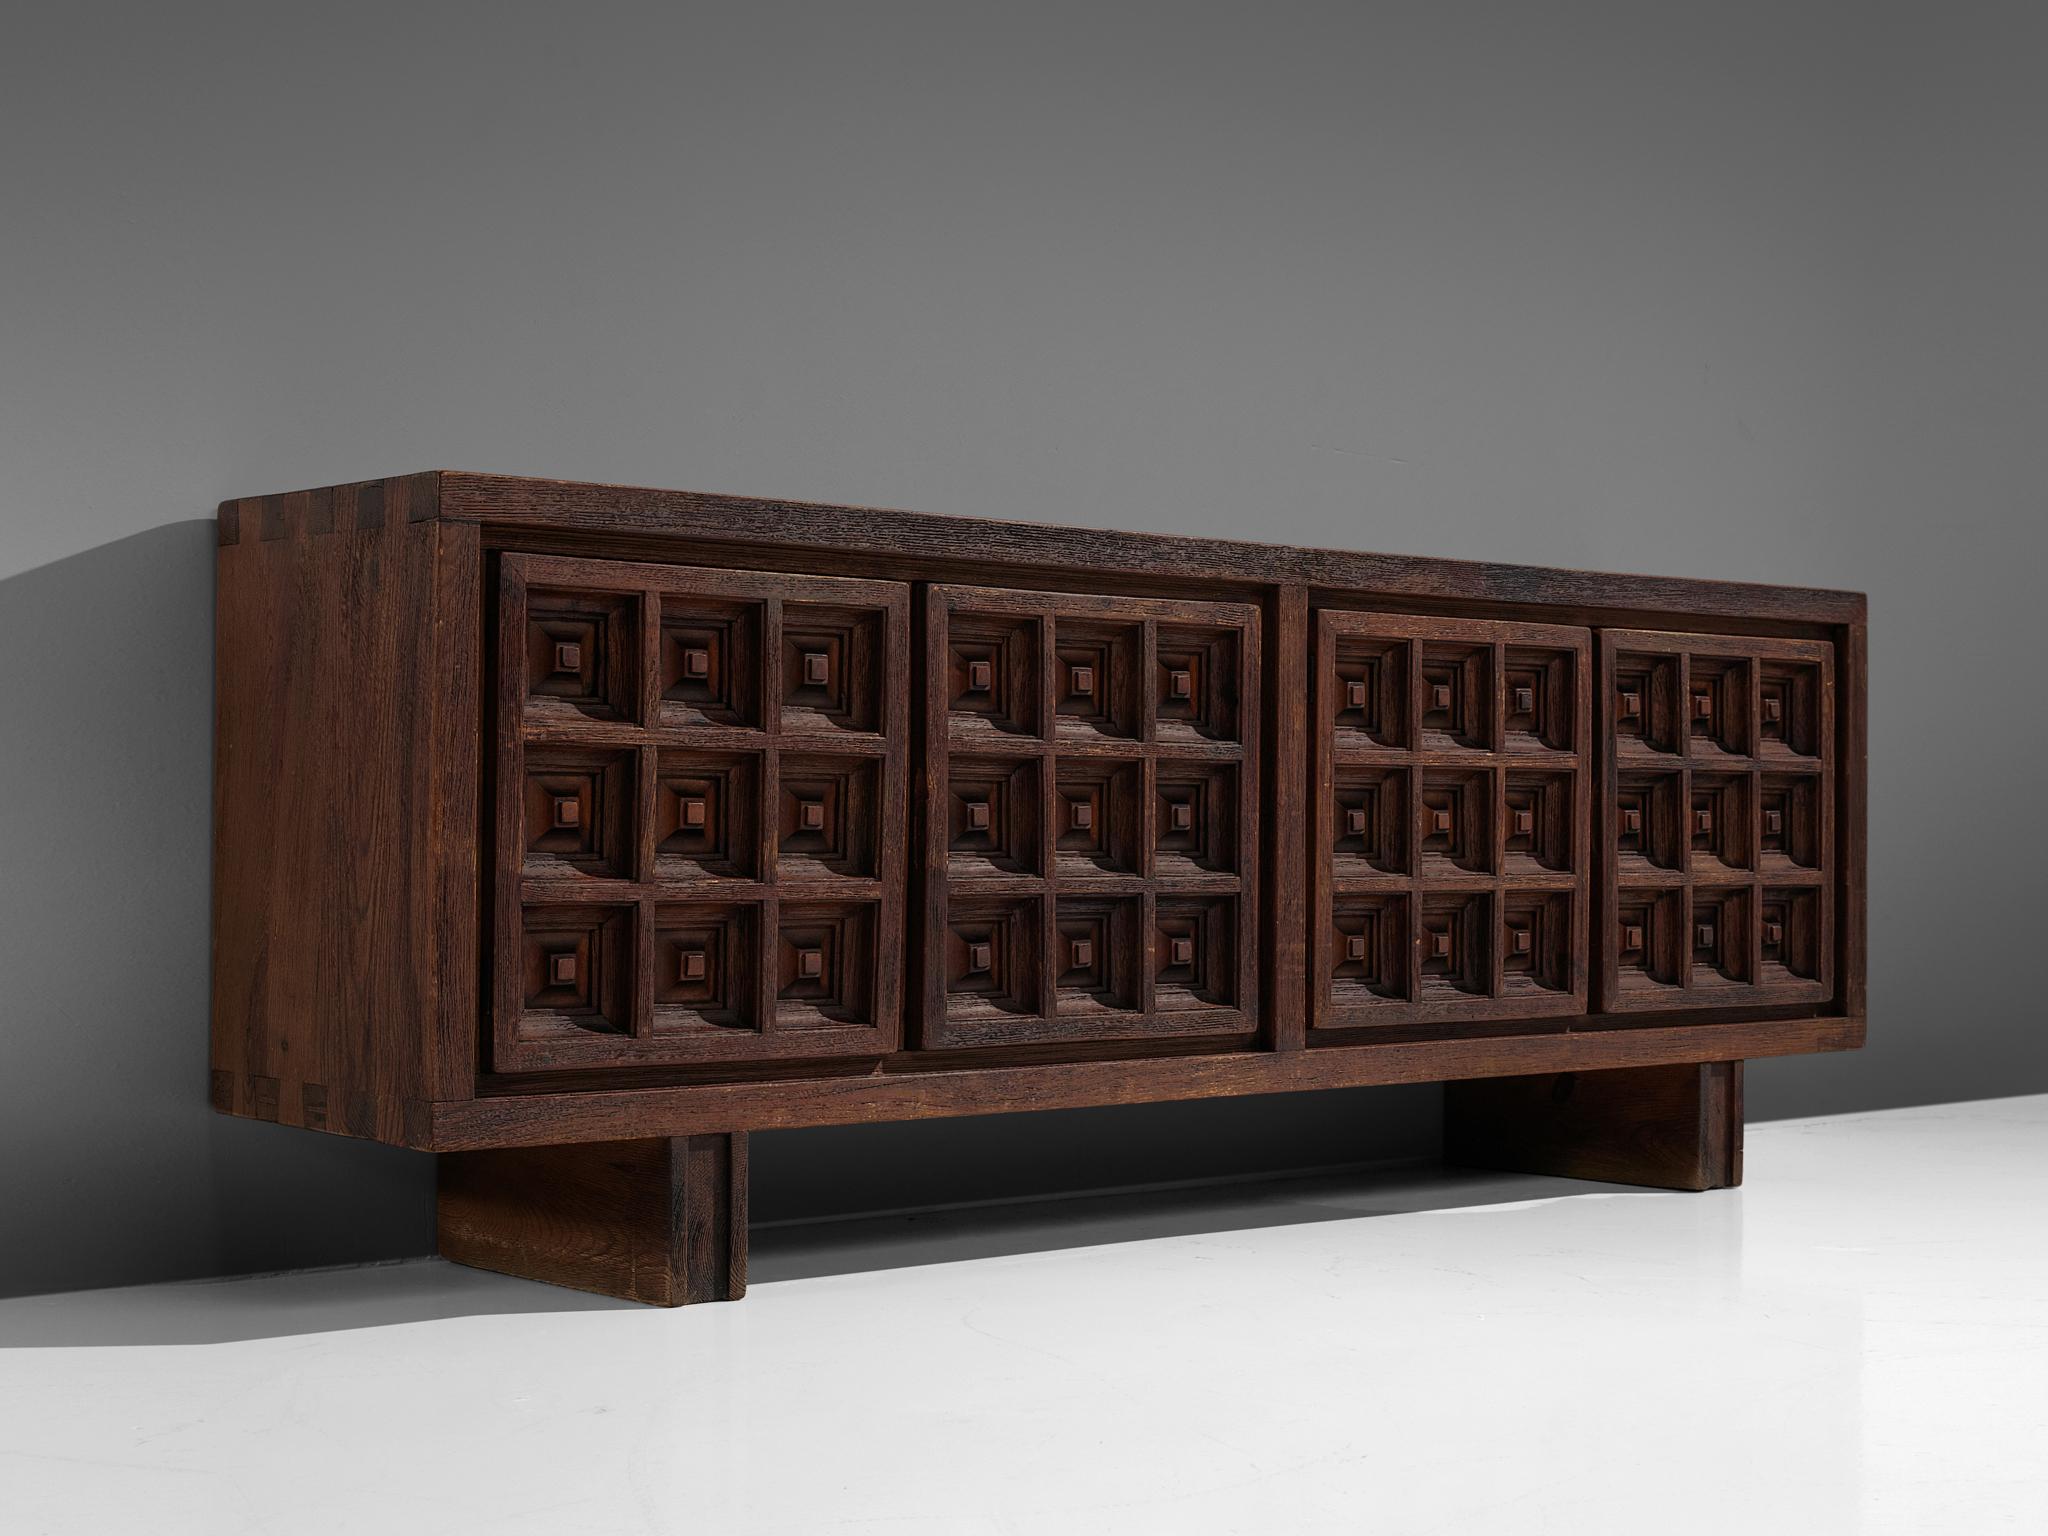 Biosca, sideboard, stained pine, Spain, 1960s.

Outstanding Spanish sideboard that is executed by Biosca in a beautiful way. The four-door credenza features doors with a graphic carved pattern. This is very typical for Brutalist style, while the